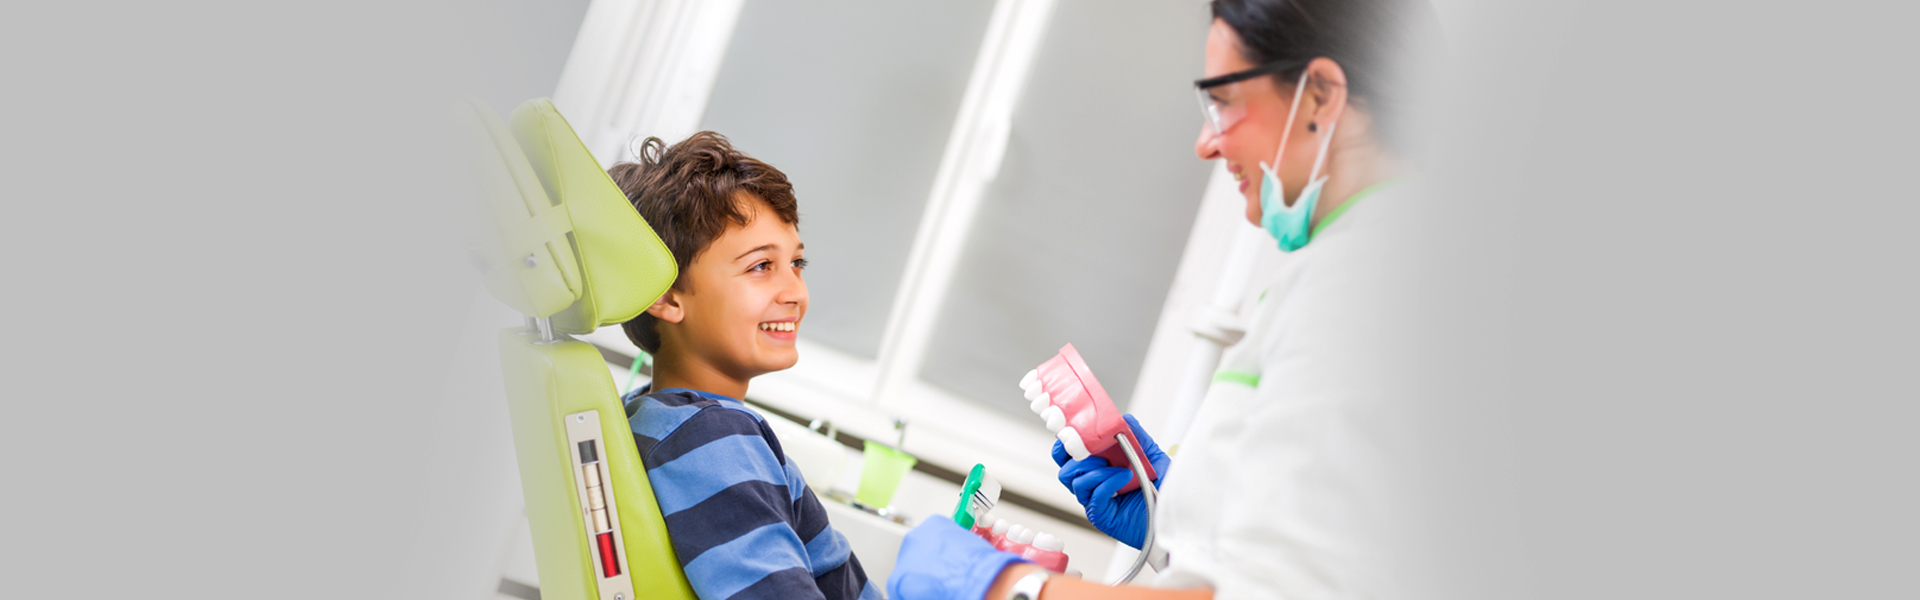 The Importance Of Pediatric Dentistry To Children’s Dental Health